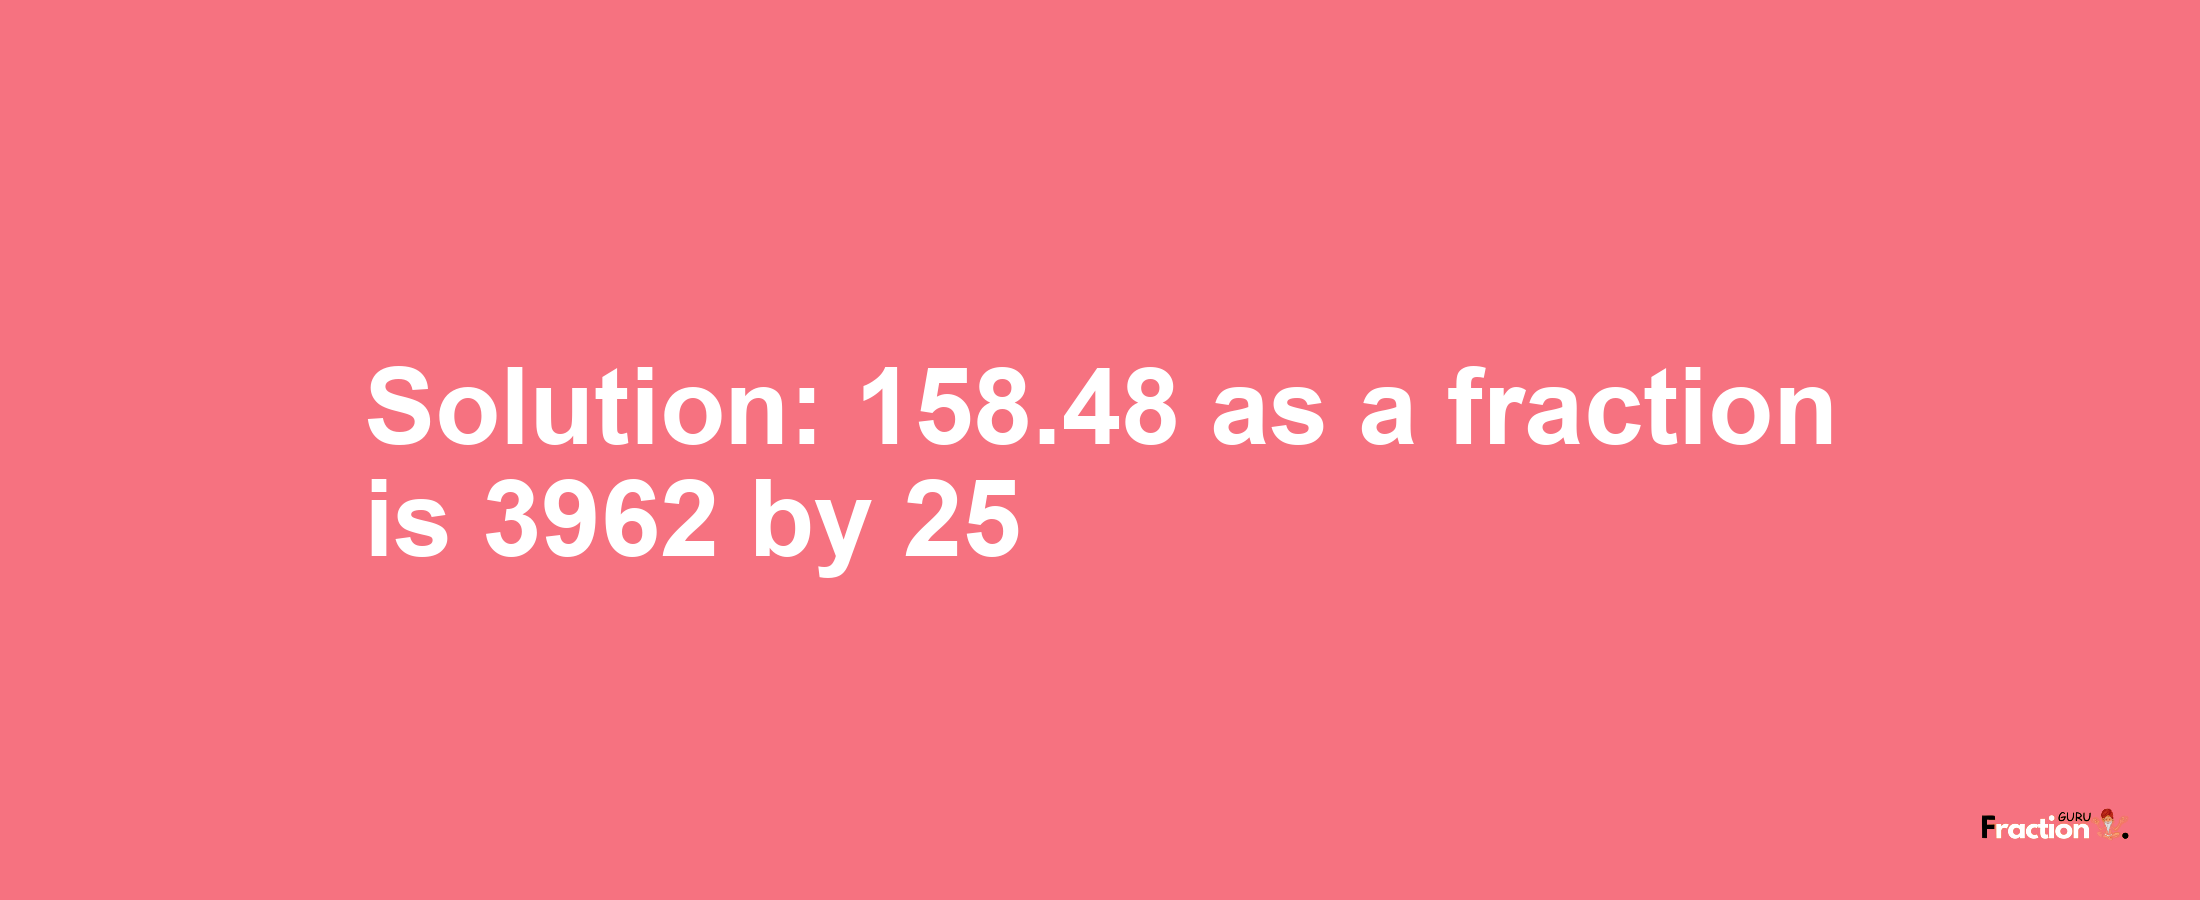 Solution:158.48 as a fraction is 3962/25